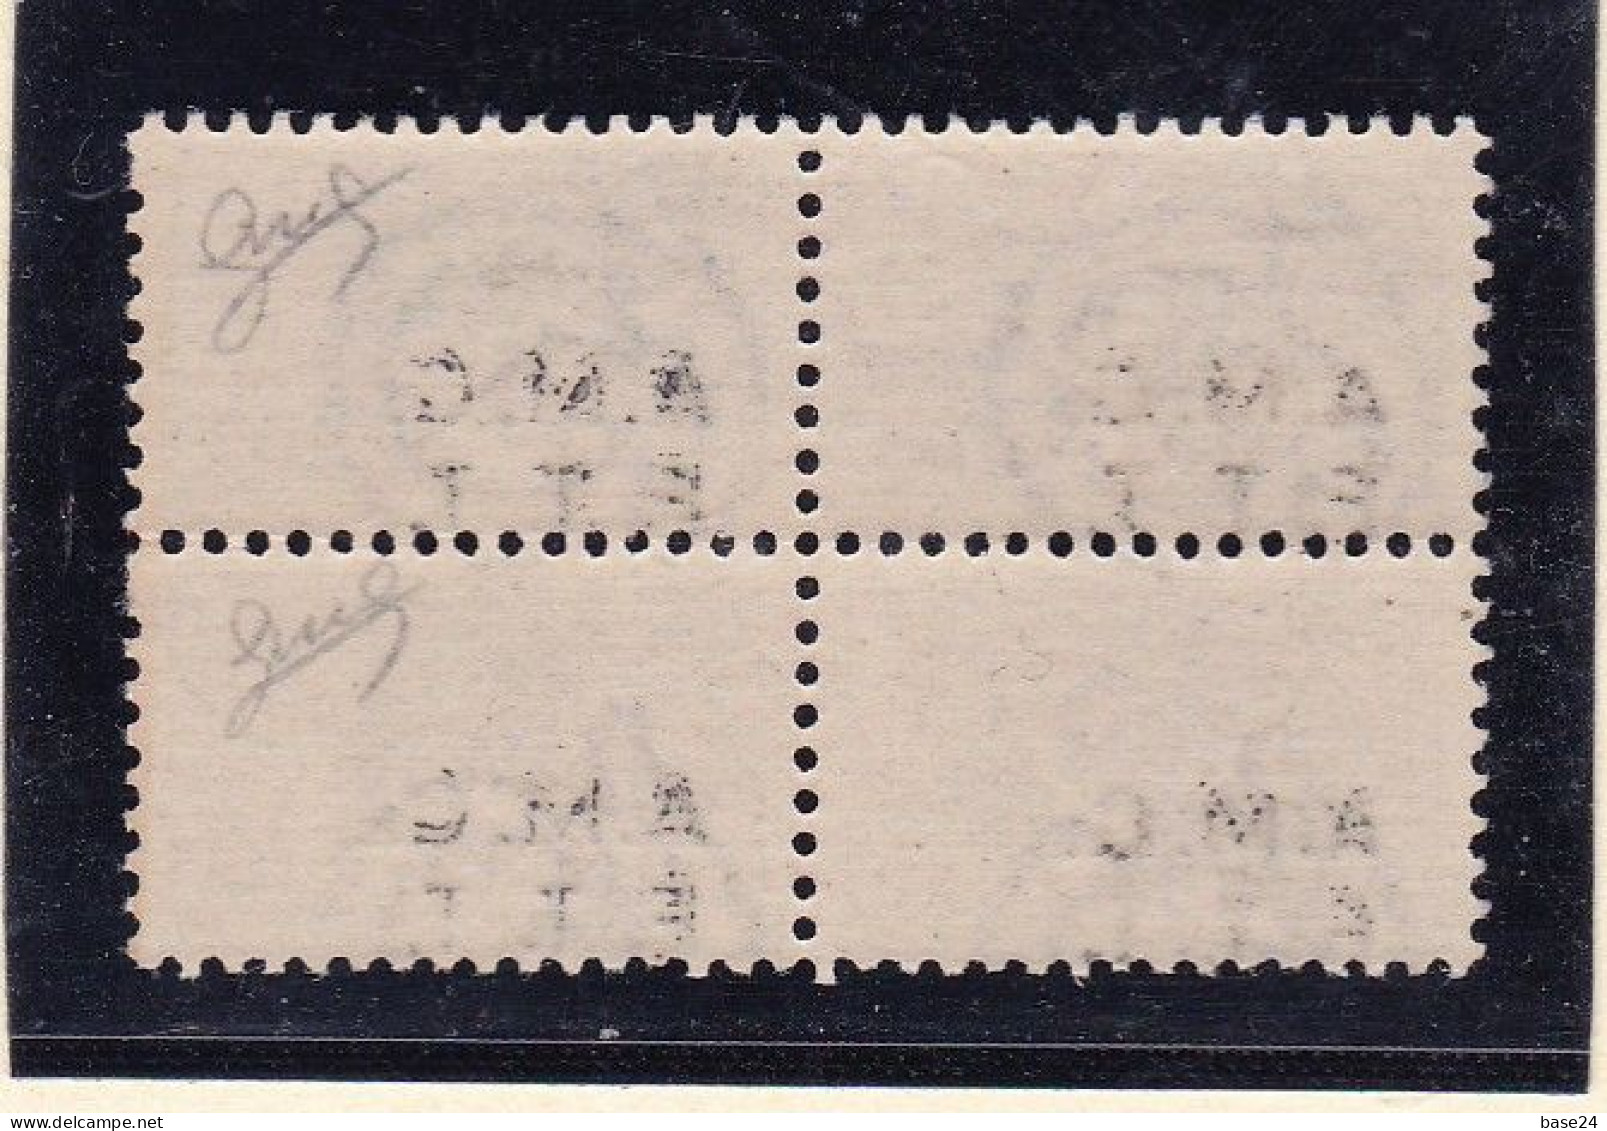 1947 Italia Italy Trieste A PACCHI POSTALI  PARCEL POST Coppia 20 Lire Varietà 7g Soprastampa Spostata In Basso MNH Pair - Postal And Consigned Parcels